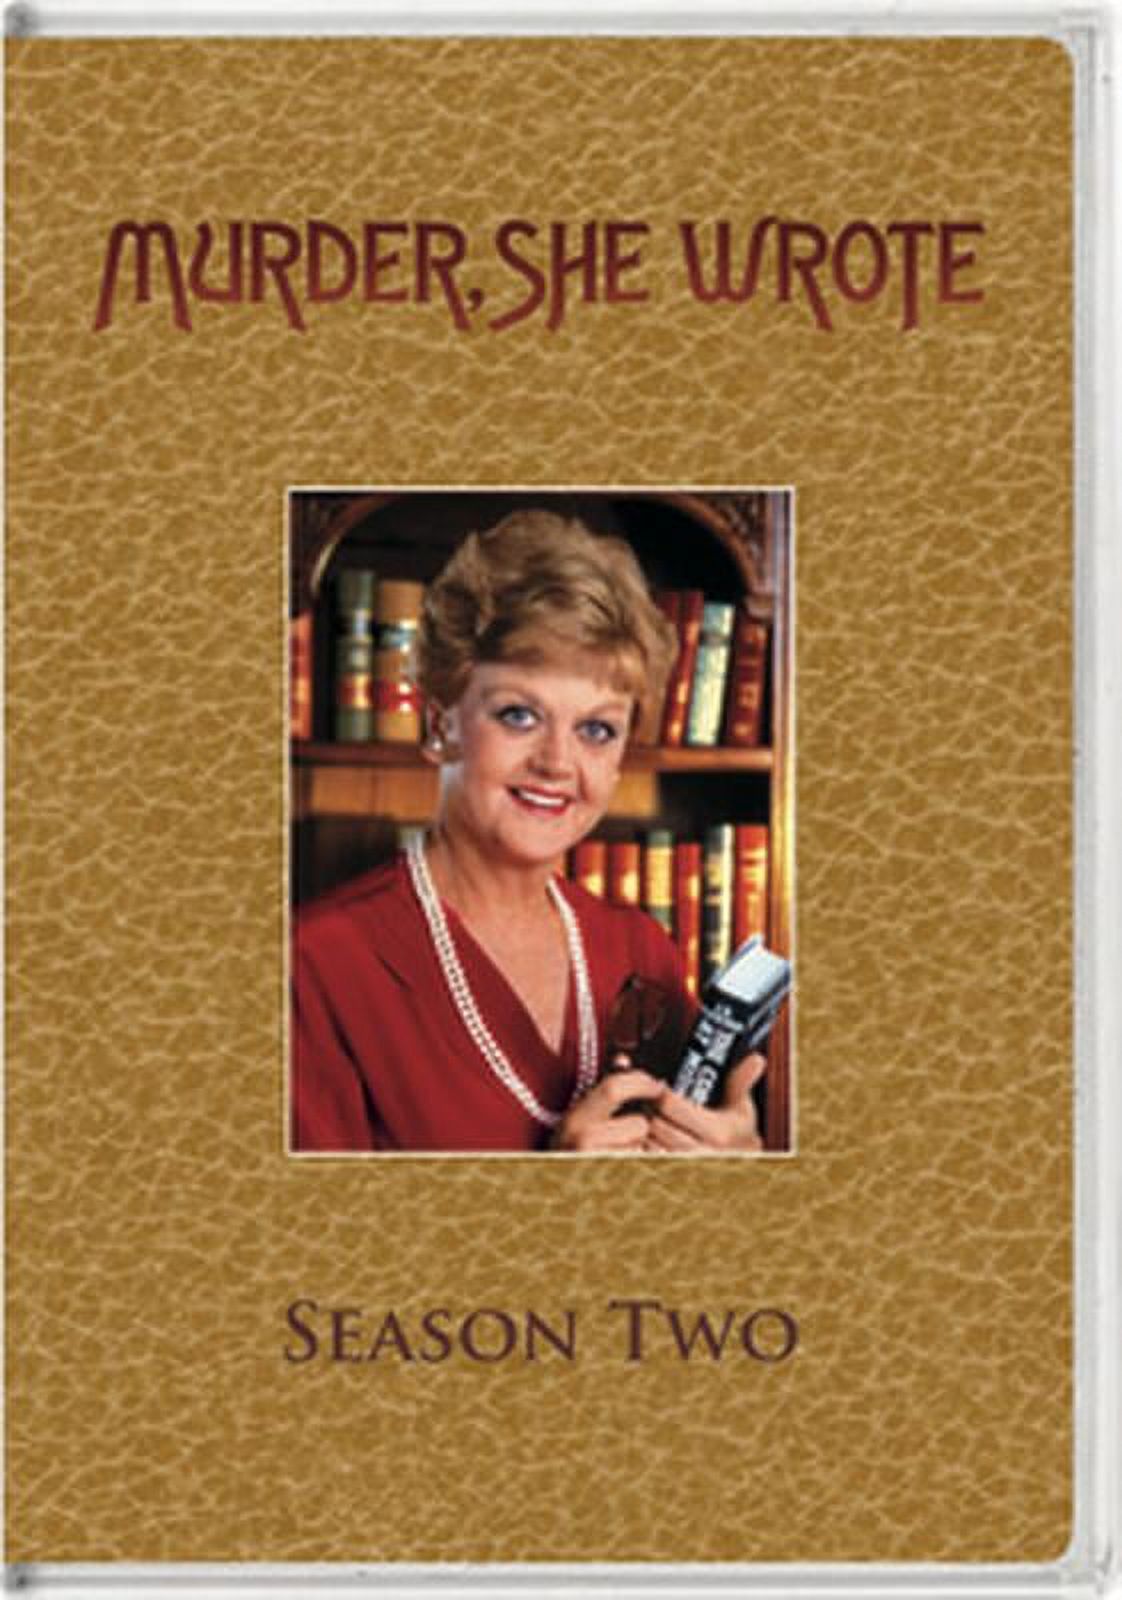 Murder, She Wrote: Season Two (DVD) - image 1 of 4